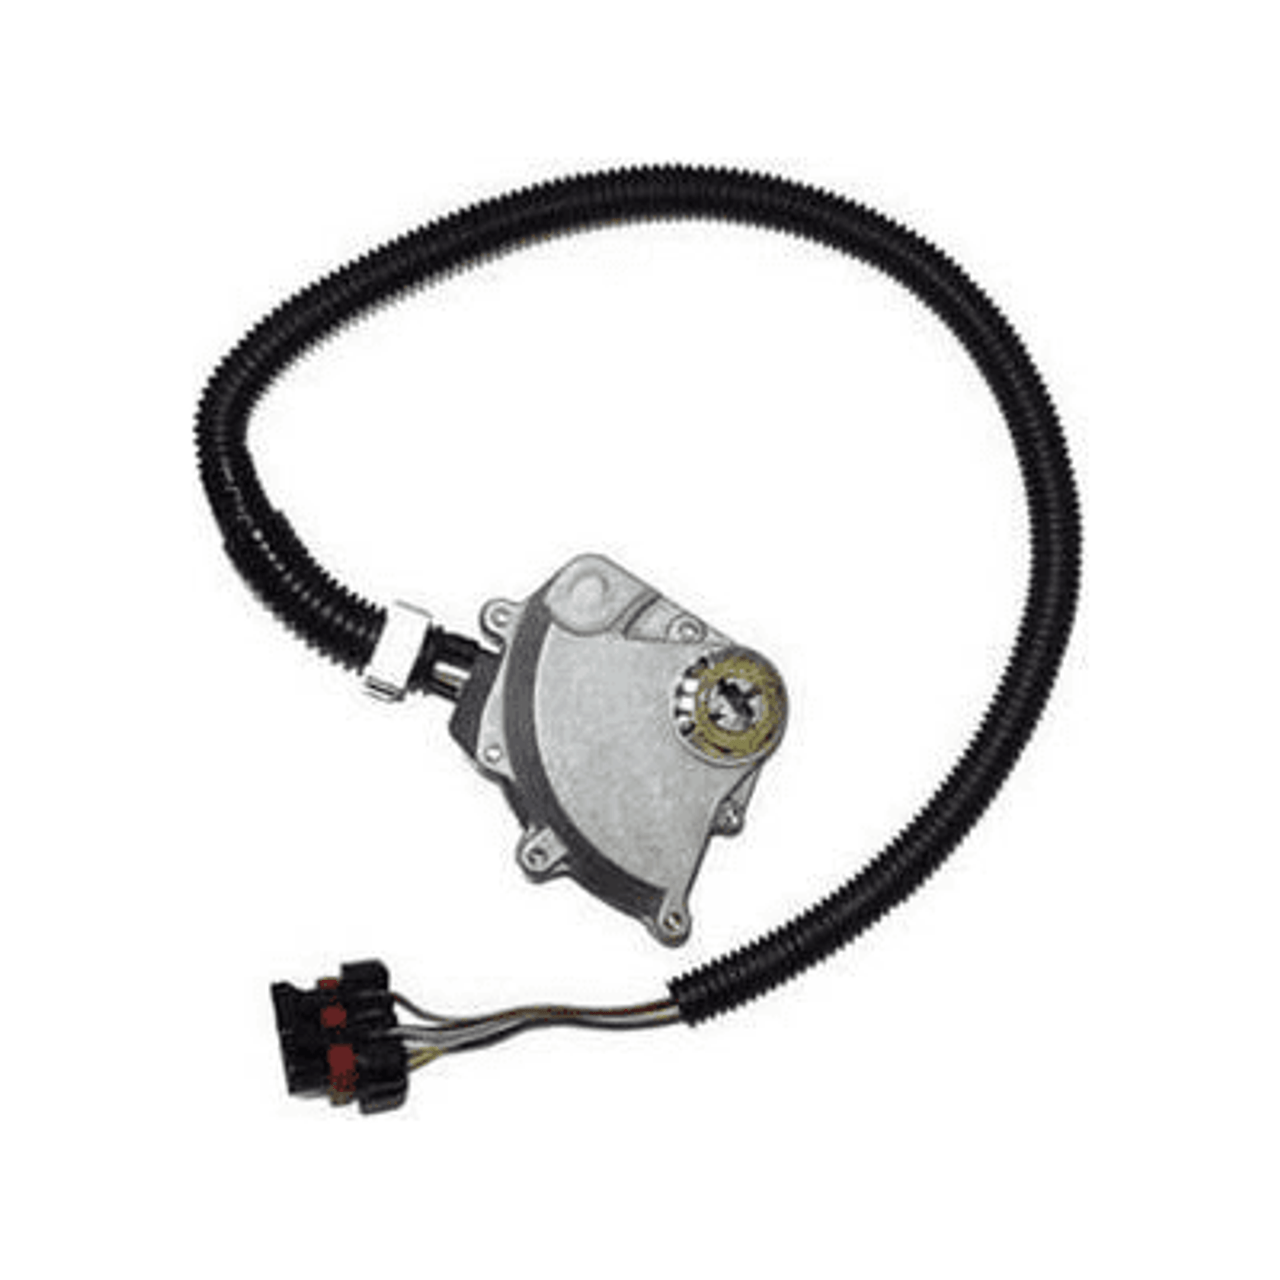 Mopar AW4 Transmission Neutral Safety Switch for 1997-2001 Cherokee XJ